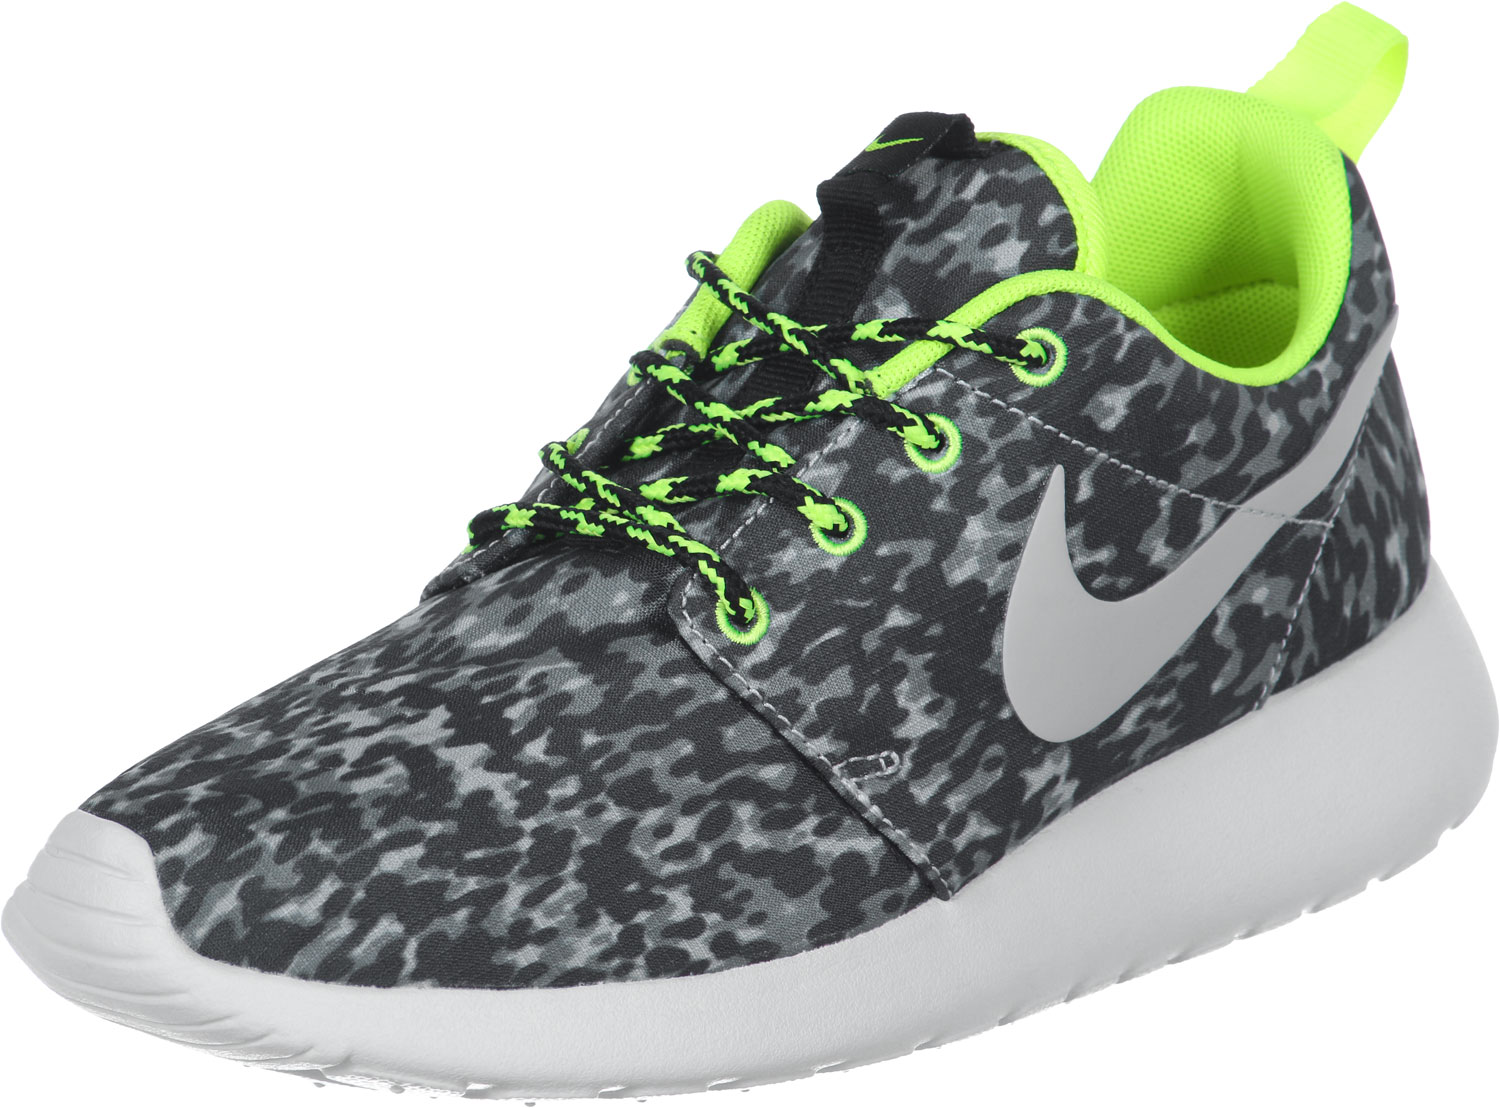 nike roshe run print gs chaussures gris, fragile Nike Roshe One Print W Chaussures Gris neon Jaune O5i816586 opération une plus grande image